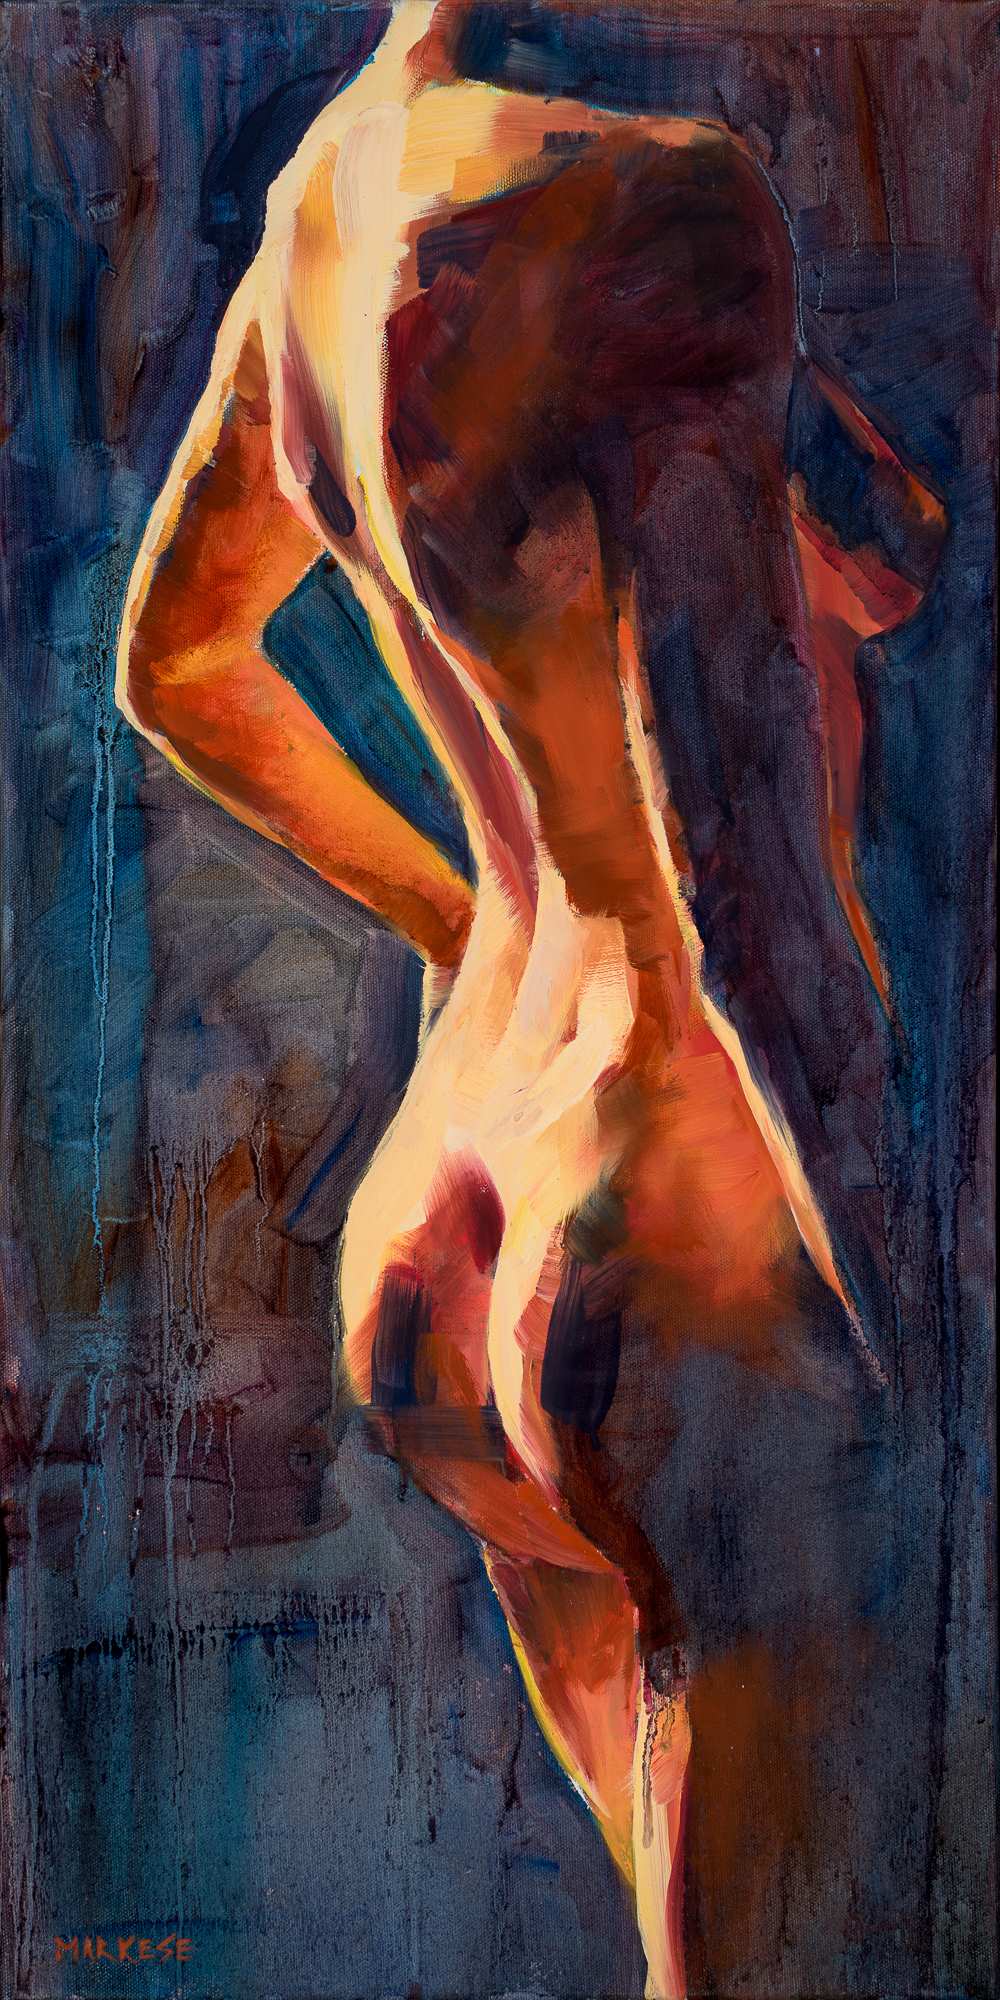 "I Was on Fire for You 1" is the inaugural piece in a captivating series that delves into the complexities of passion, lust, and vulnerability.